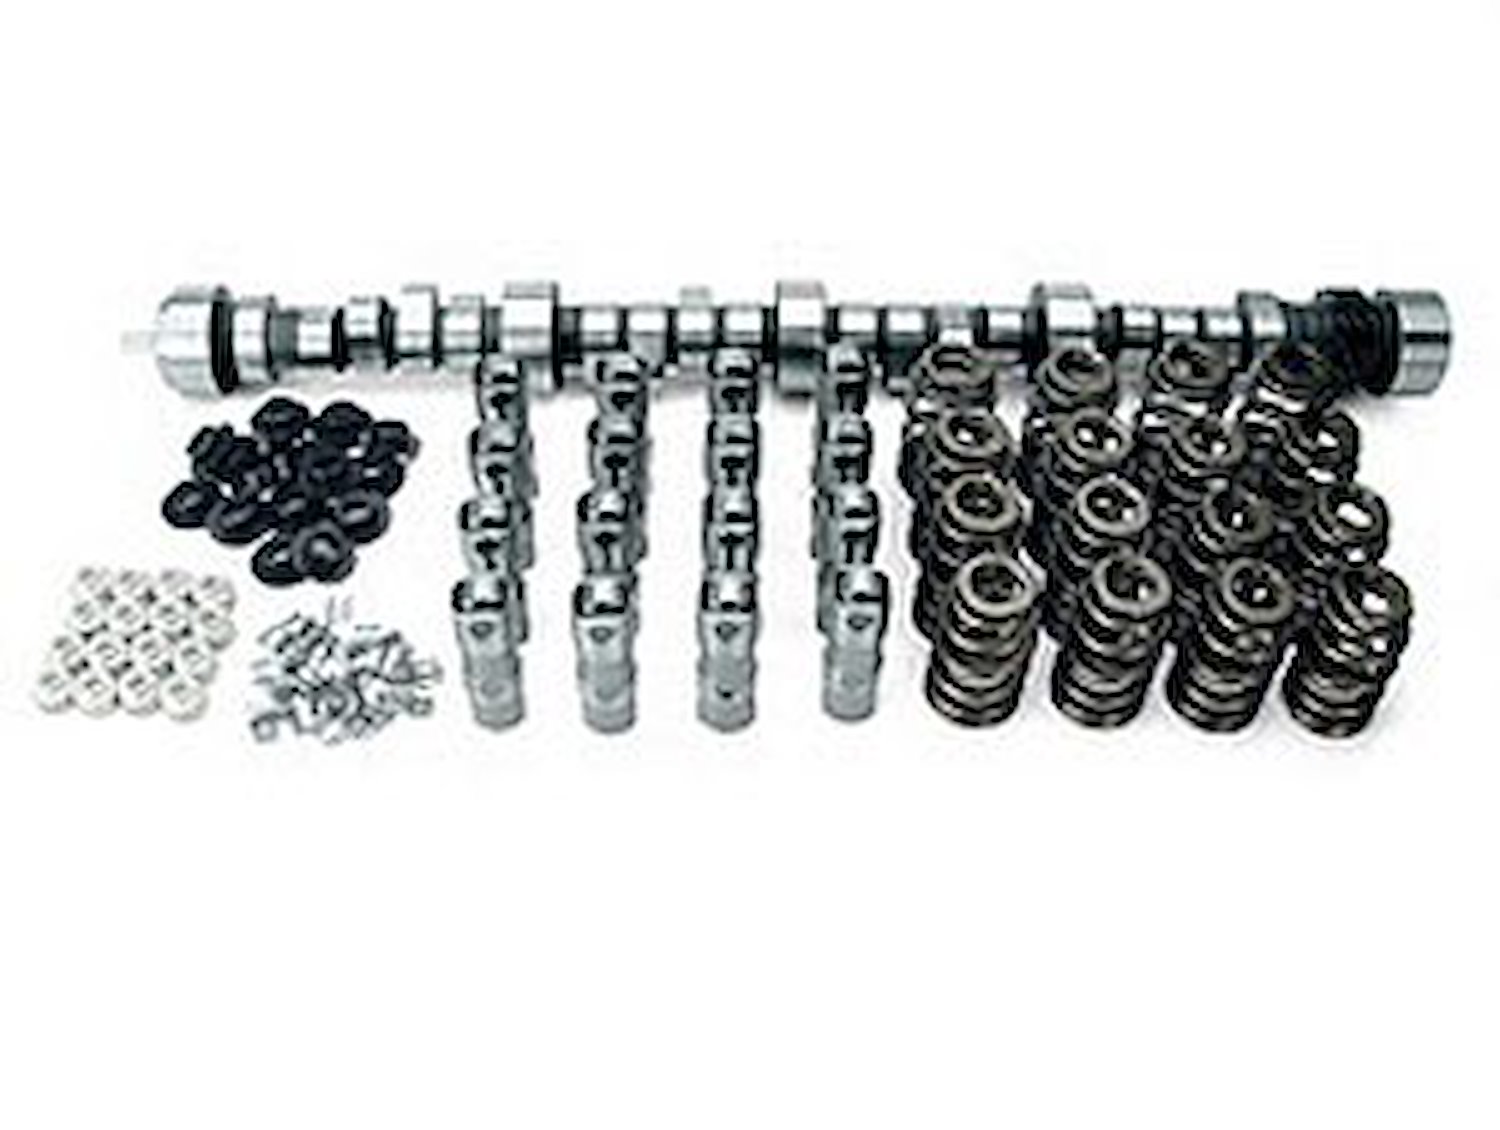 XFI Hydraulic Roller Camshaft Complete Kit Small Block Chevy 305/350 1987-95 Lift: .584"/.579" With 1.6 Rockers